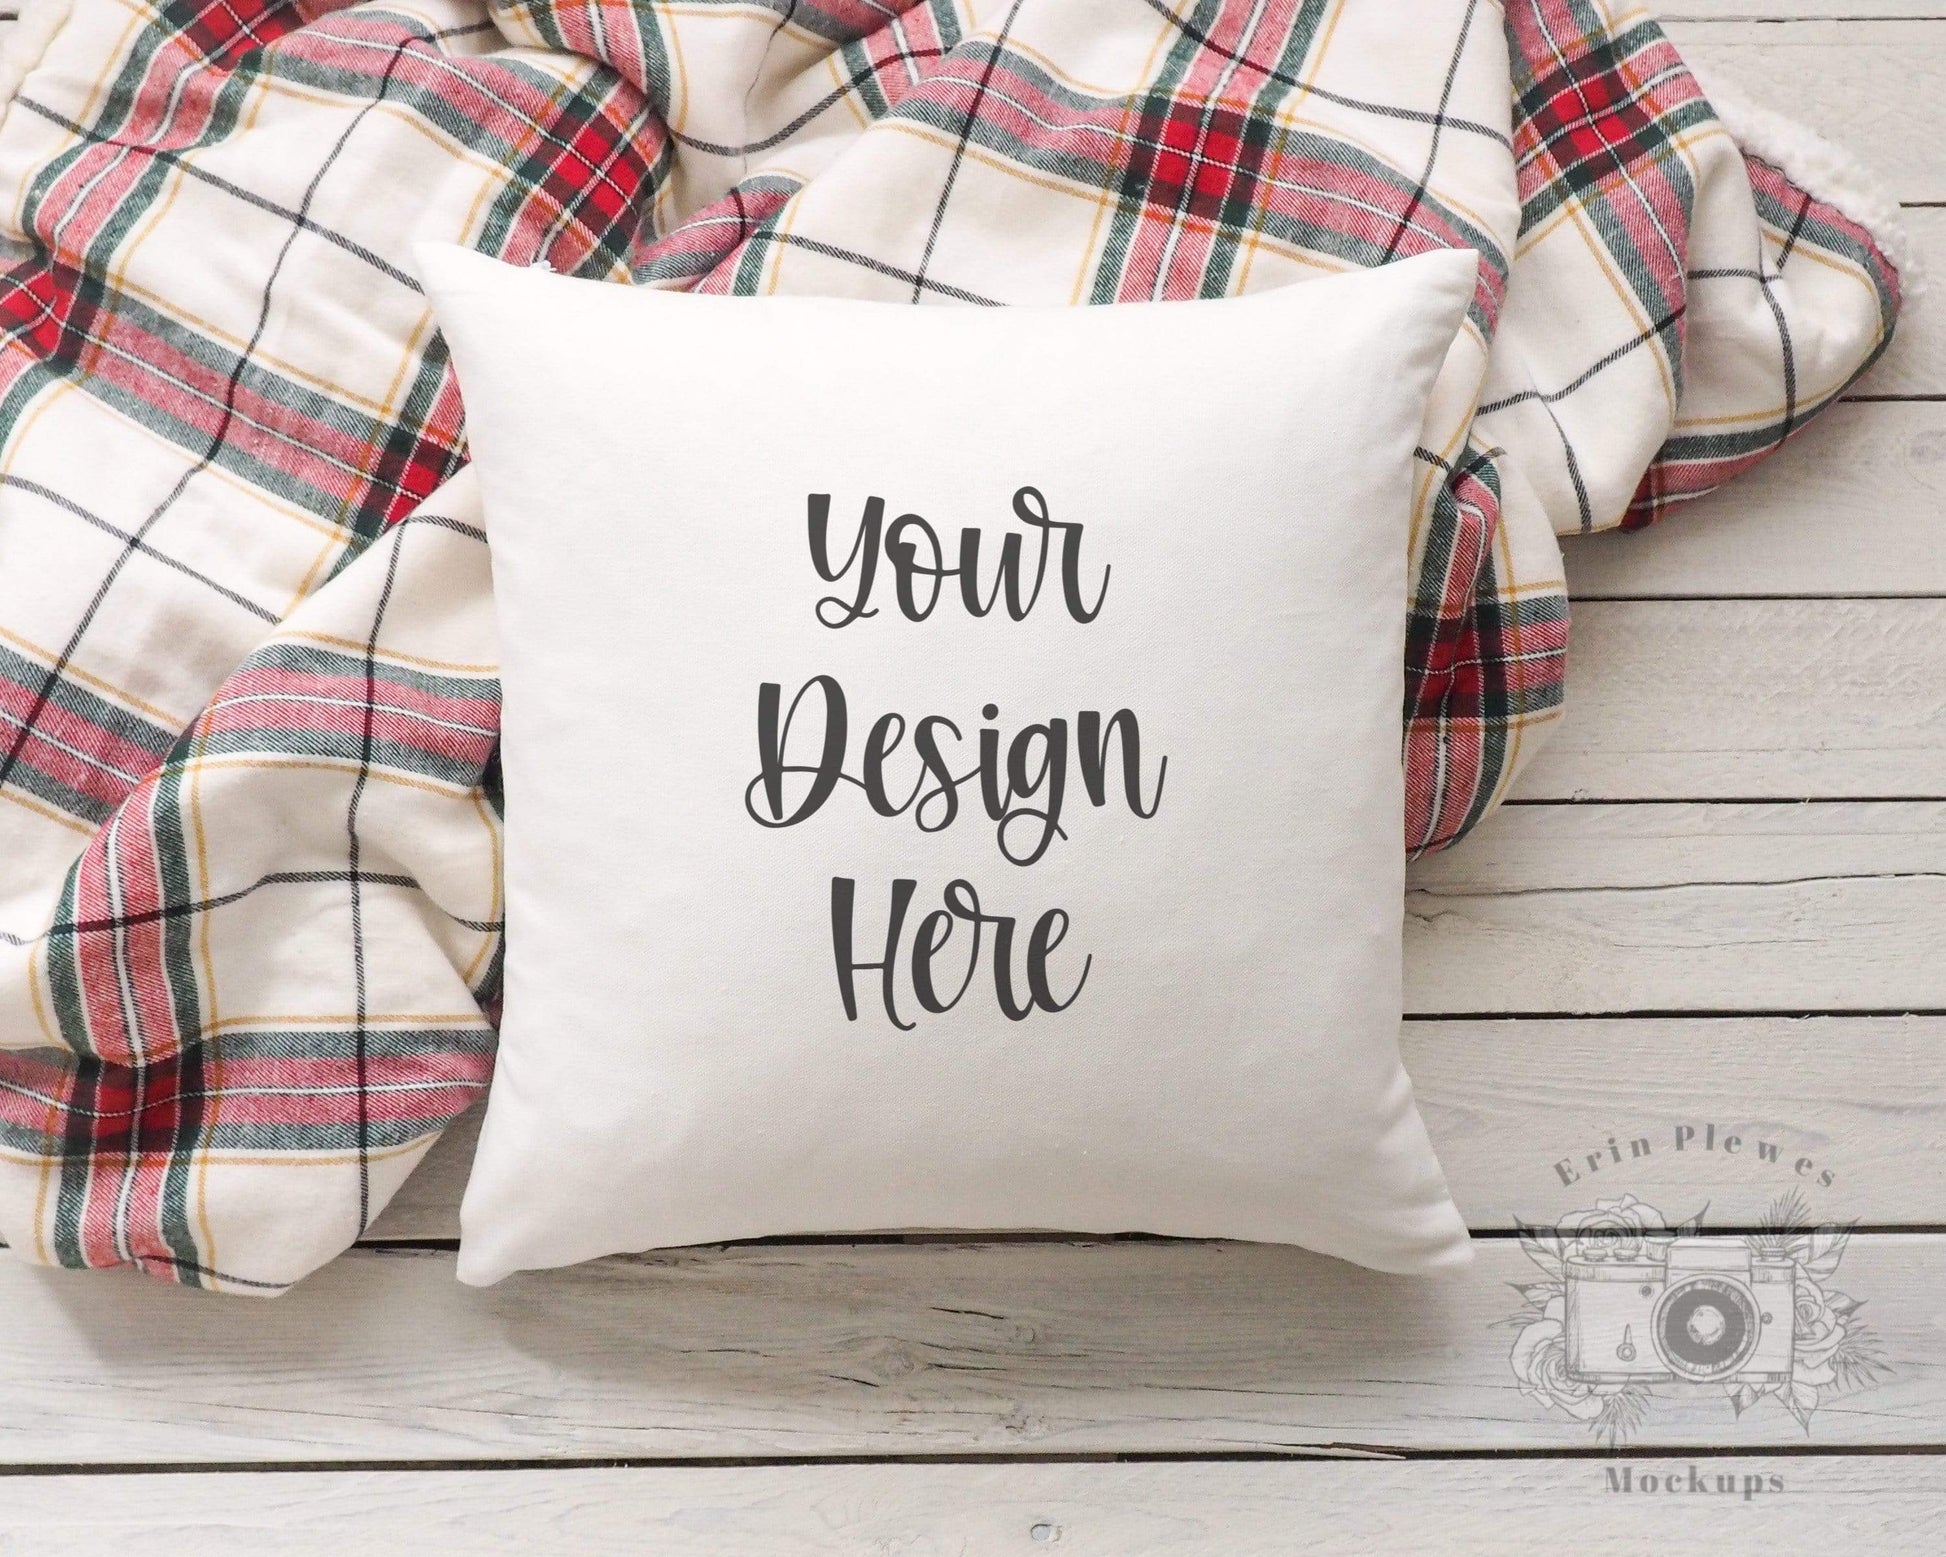 Erin Plewes Mockups Pillow Mockup, Square pillow mockup on white rustic wood background, White pillow case mock up jpeg digital download